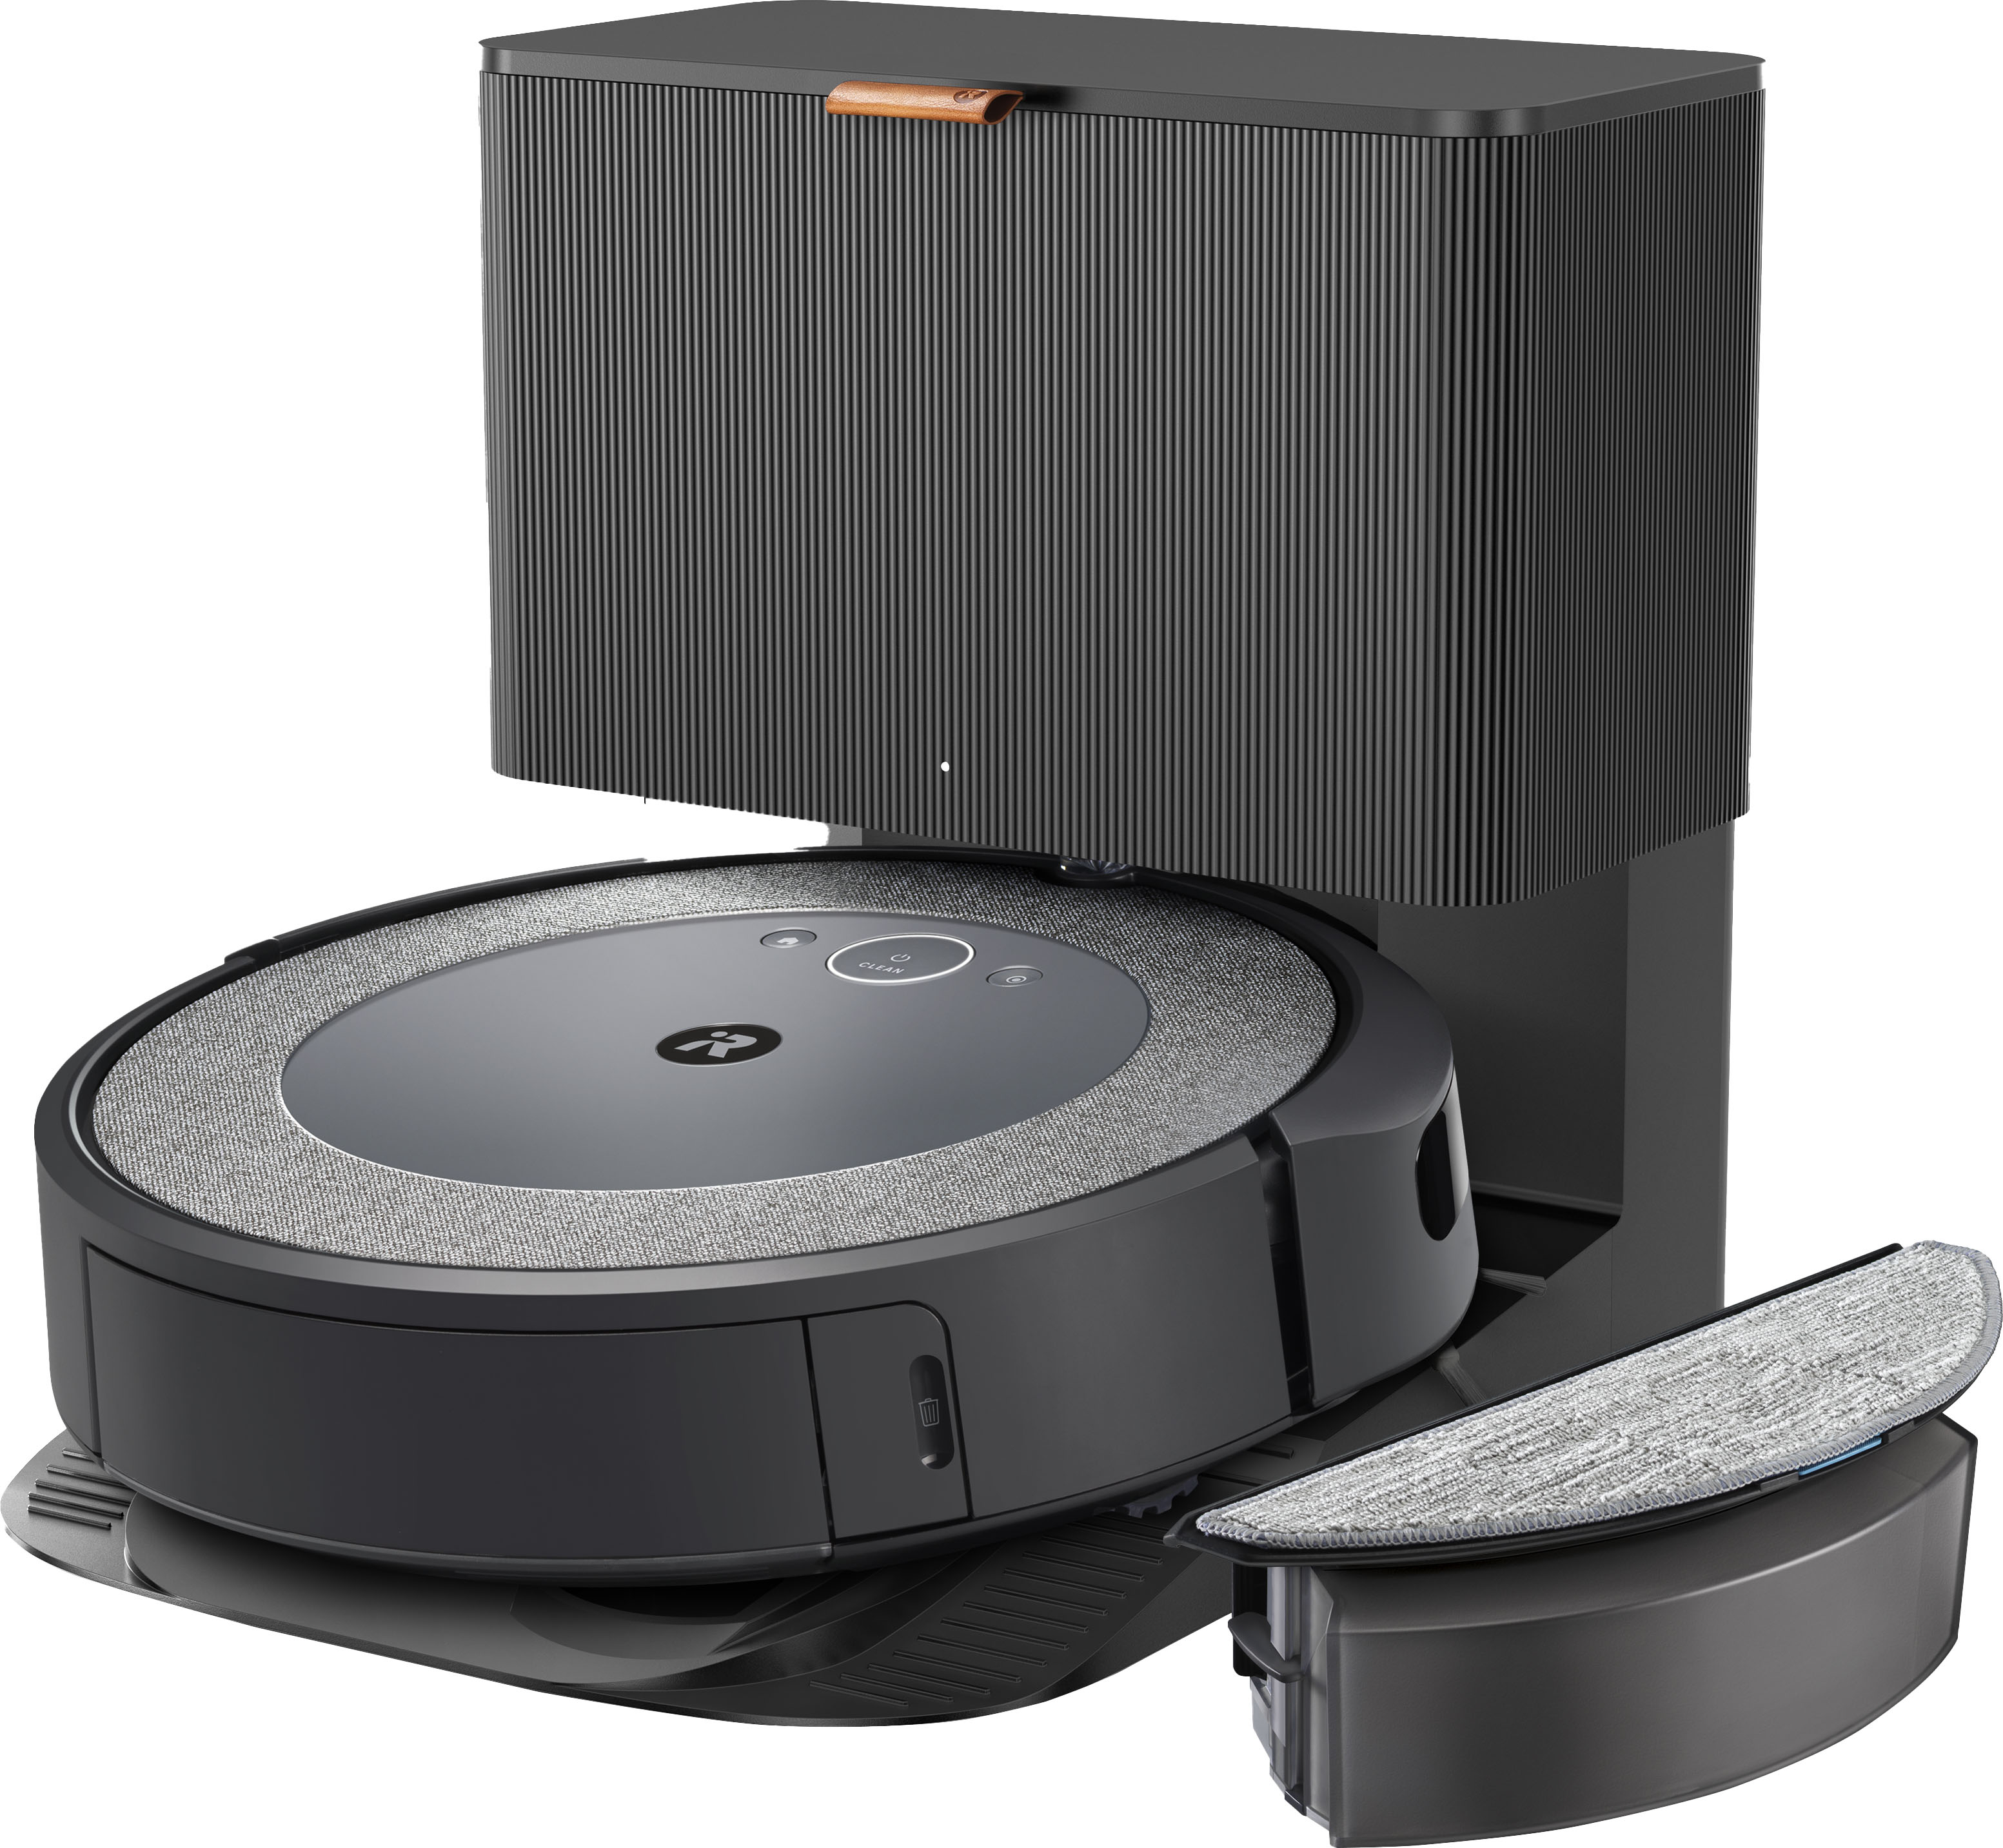 Best robot vacuum deal: The Roomba i2 is almost half off